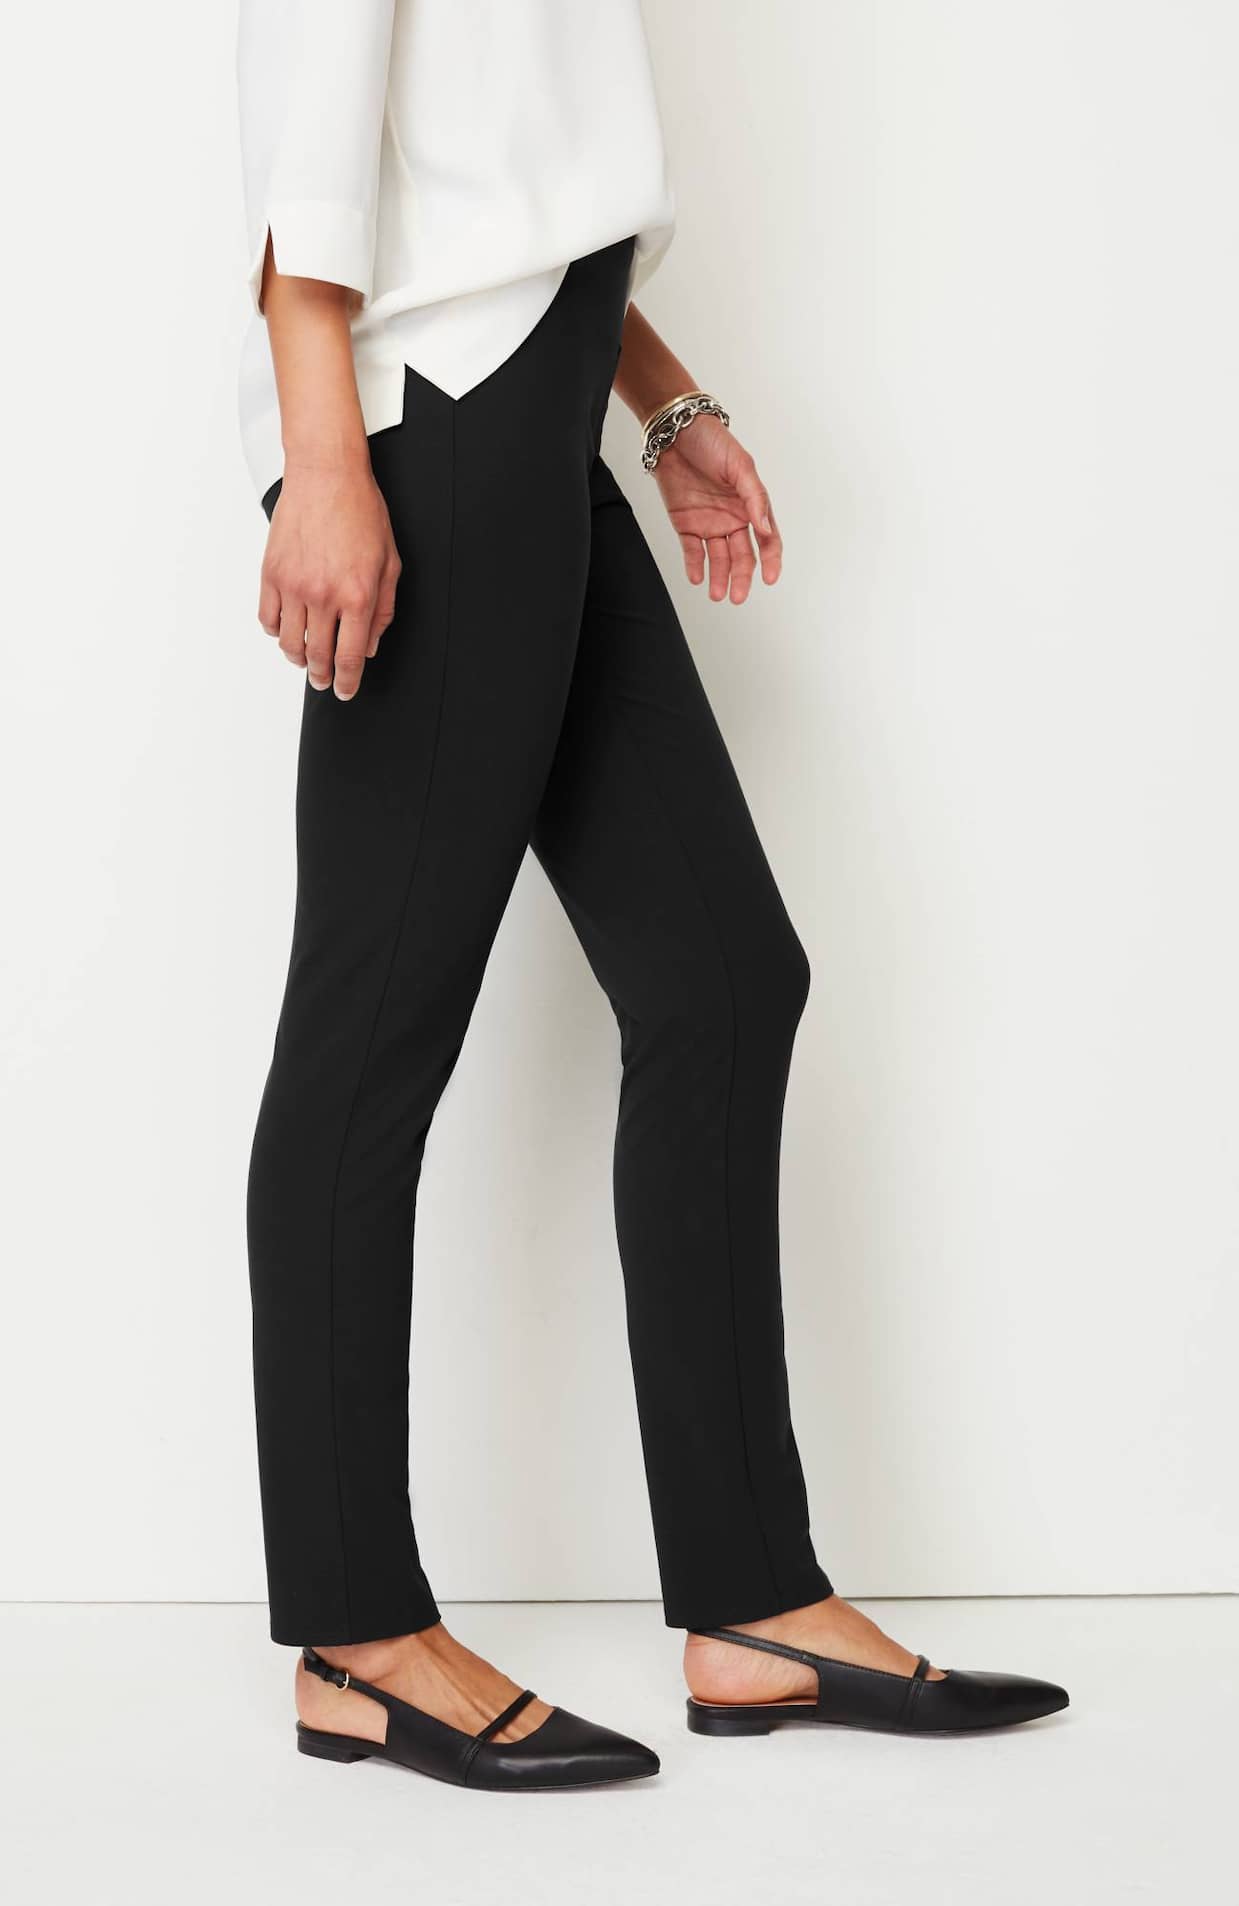 J. Jill wearever smooth fit slim leg size small Black - $50 - From Nifty